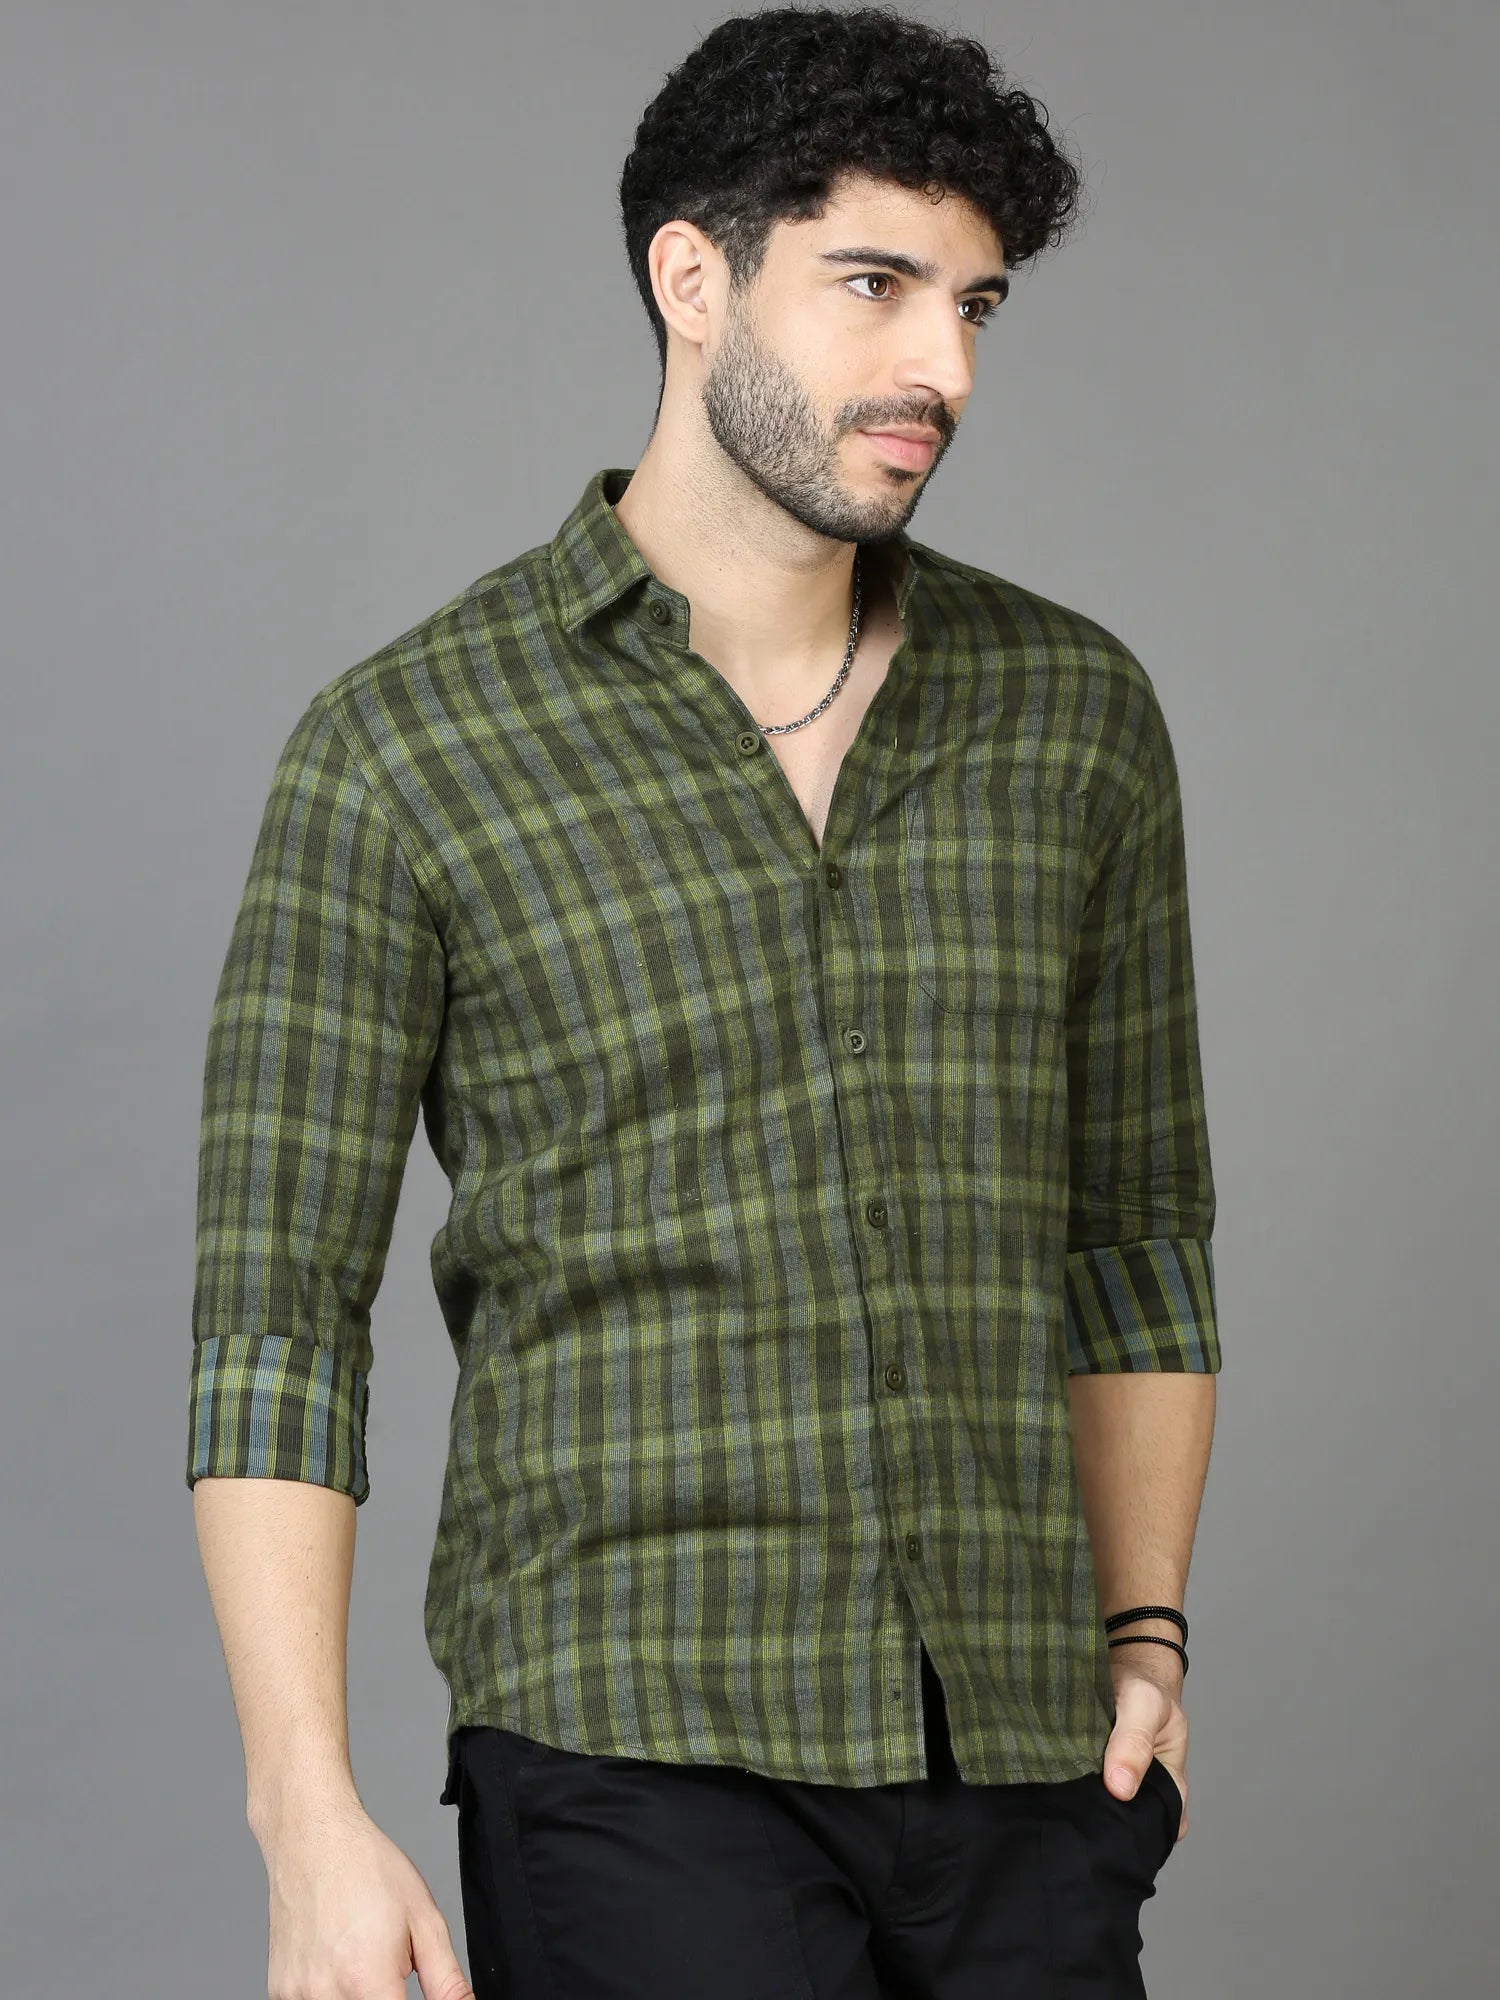 Embrald Touch Checkered Shirt for Men 